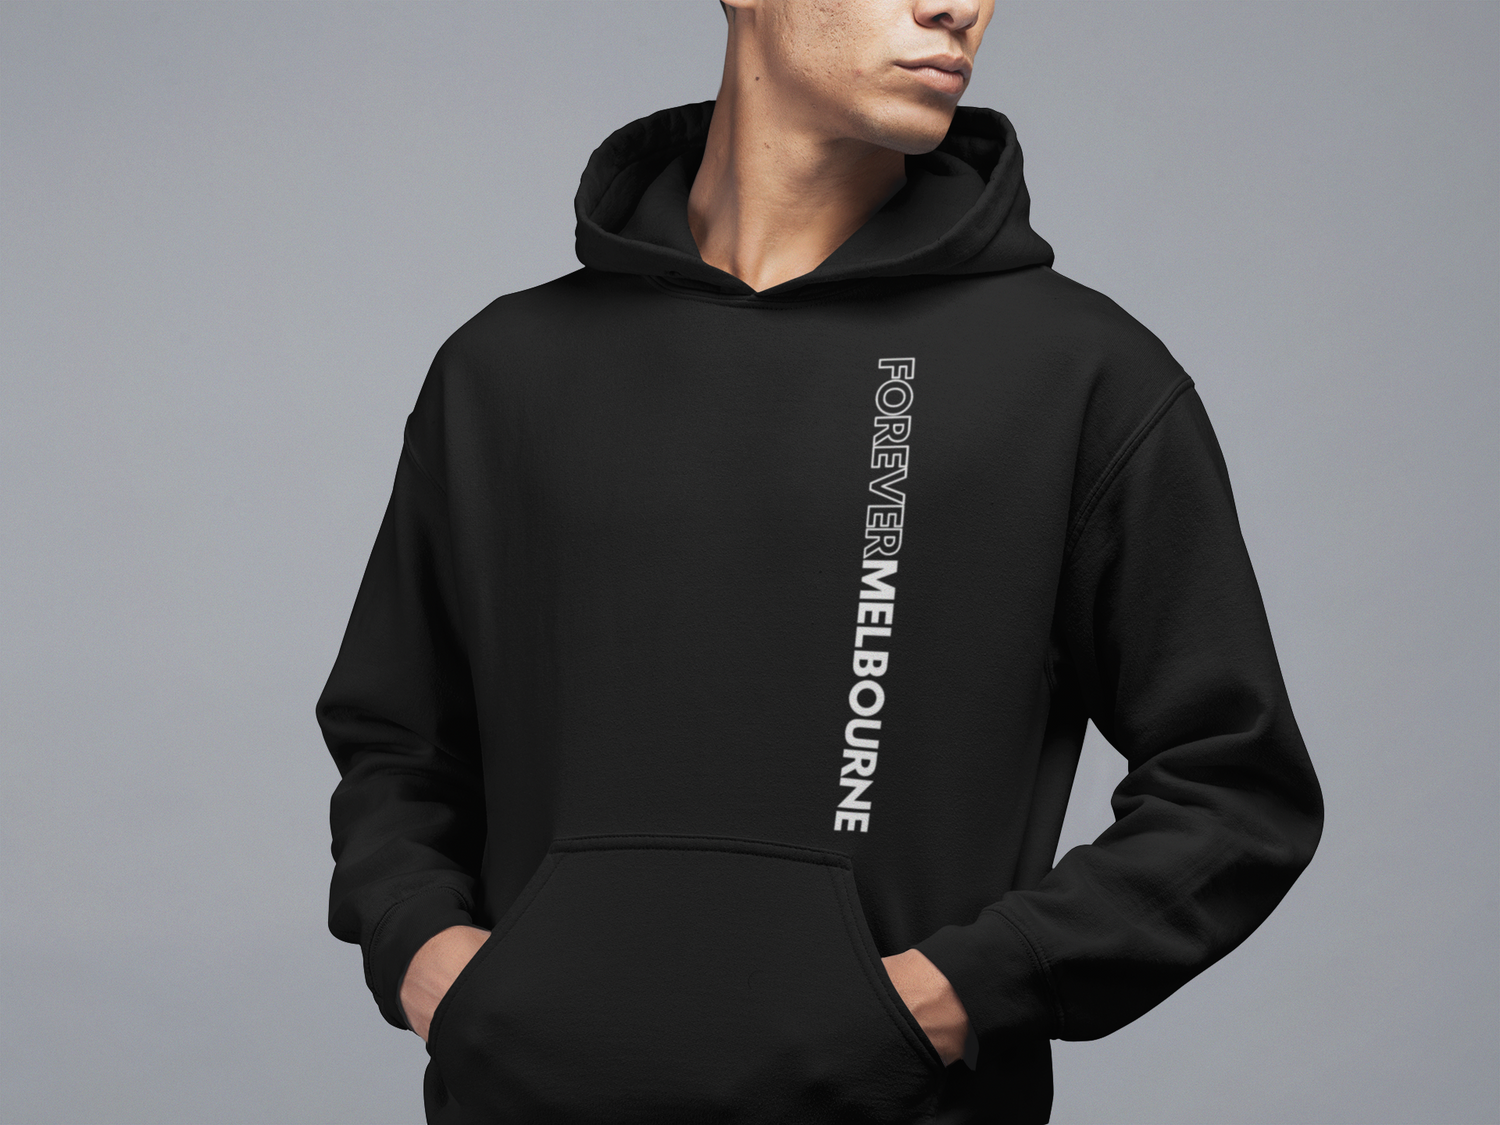 Forever Melbourne vertical - Unisex kangaroo-pockets hoodie / and in oversized sizes! 